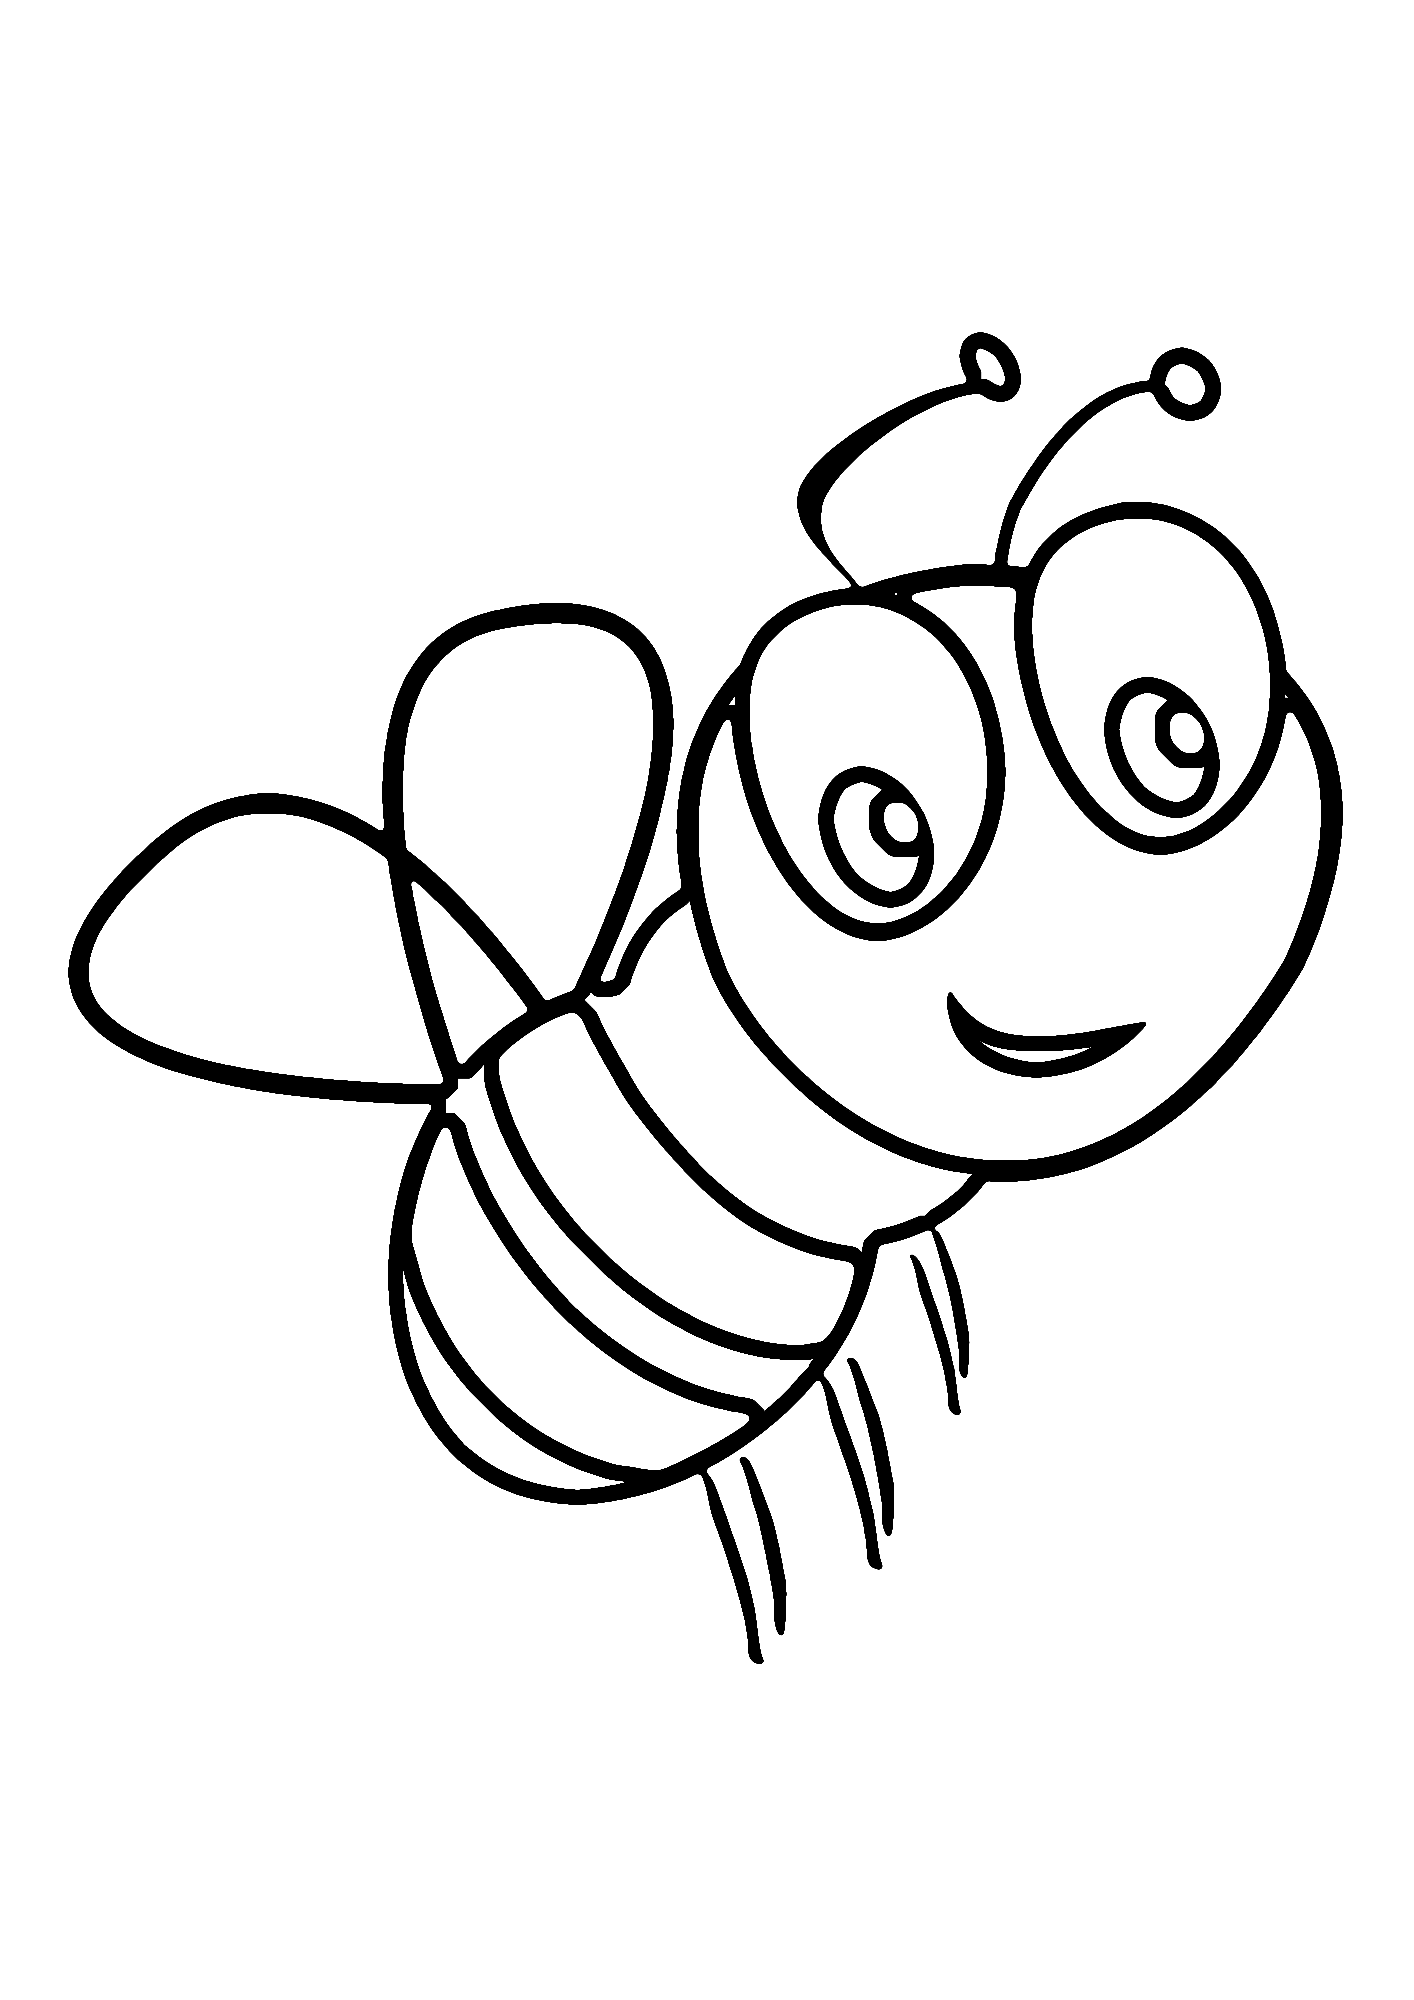 Cute Bumble Bee Coloring Pages